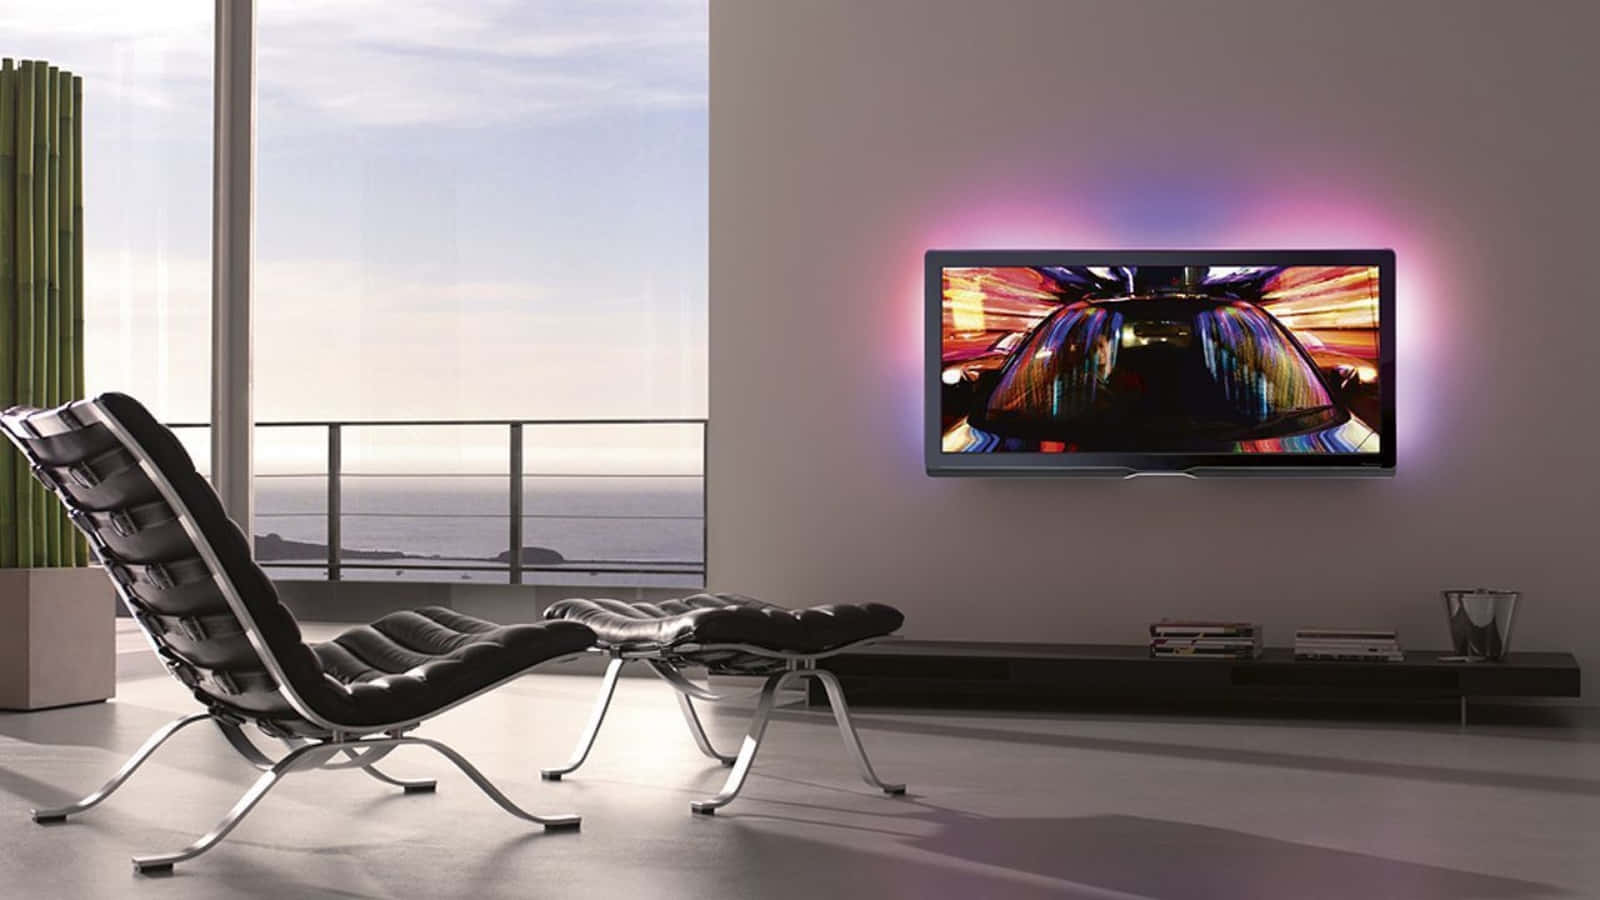 Enjoy the latest episode of your favorite show on a large flat-screen TV.